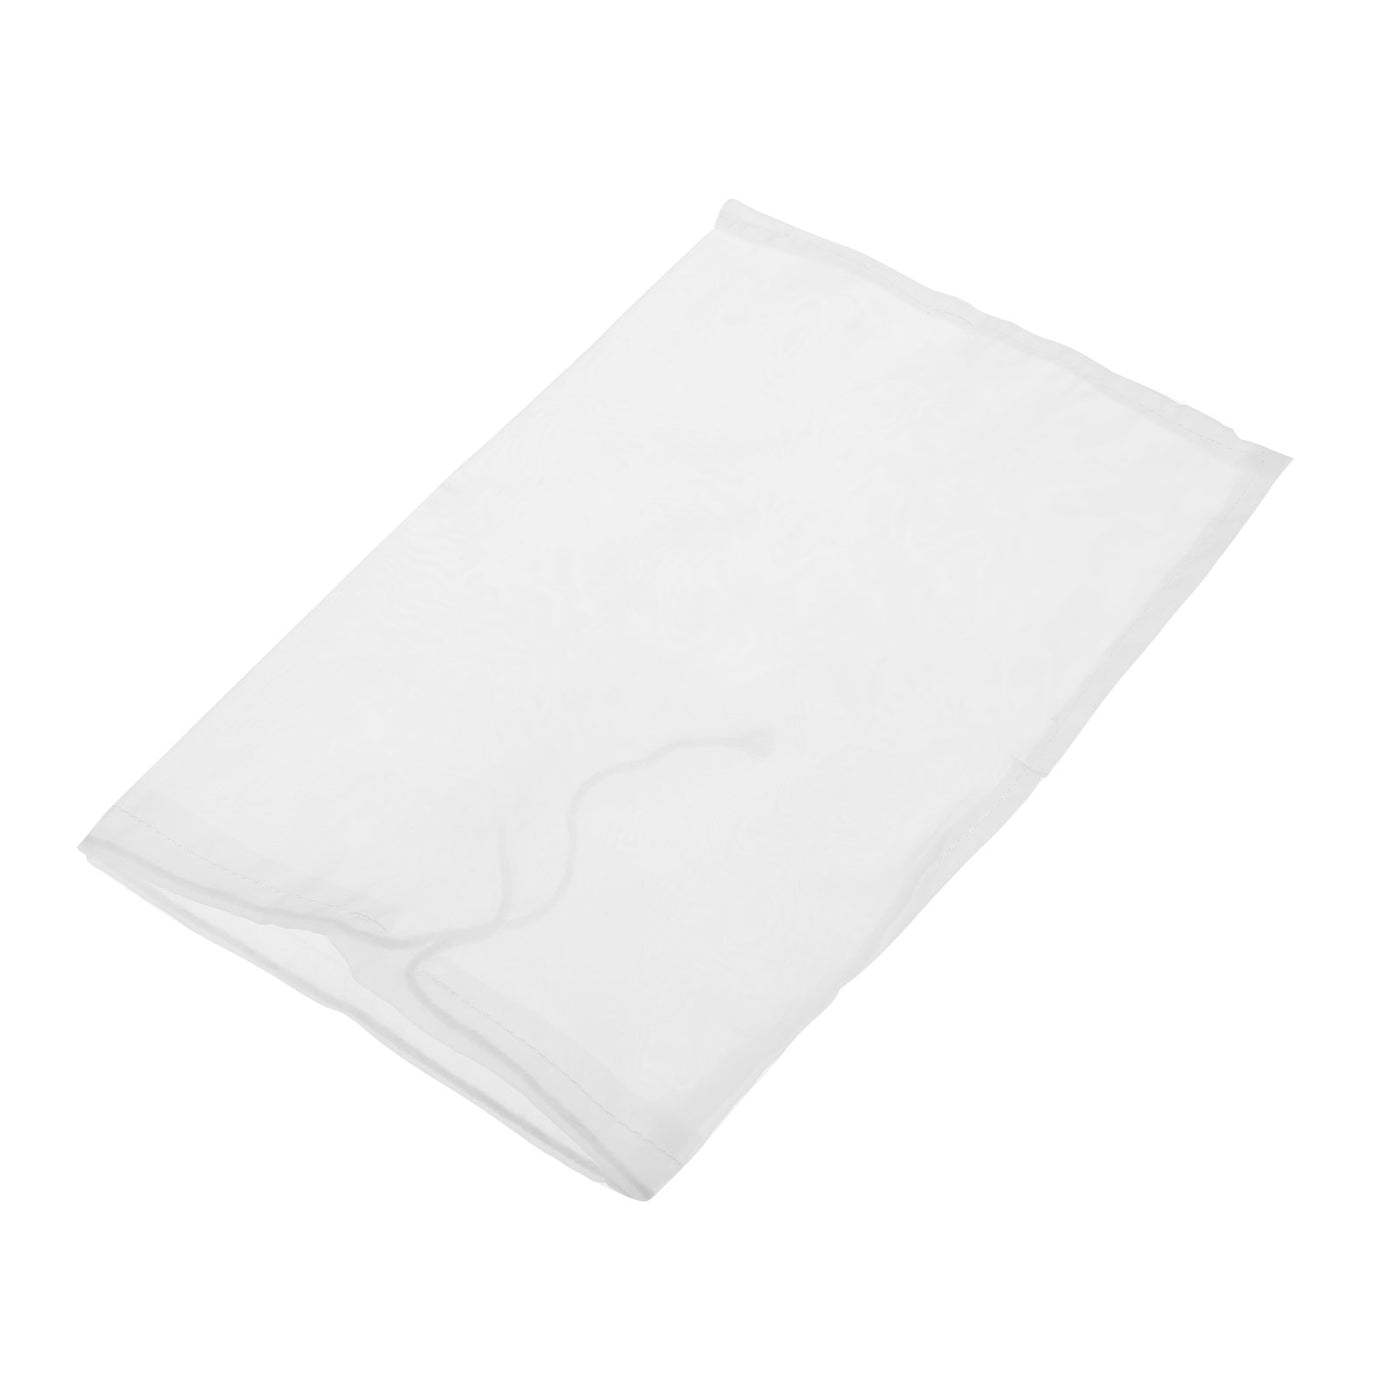 uxcell Uxcell Paint Filter Bag 120 Mesh (11.8"x7.9") Nylon Strainer for Filtering Paint